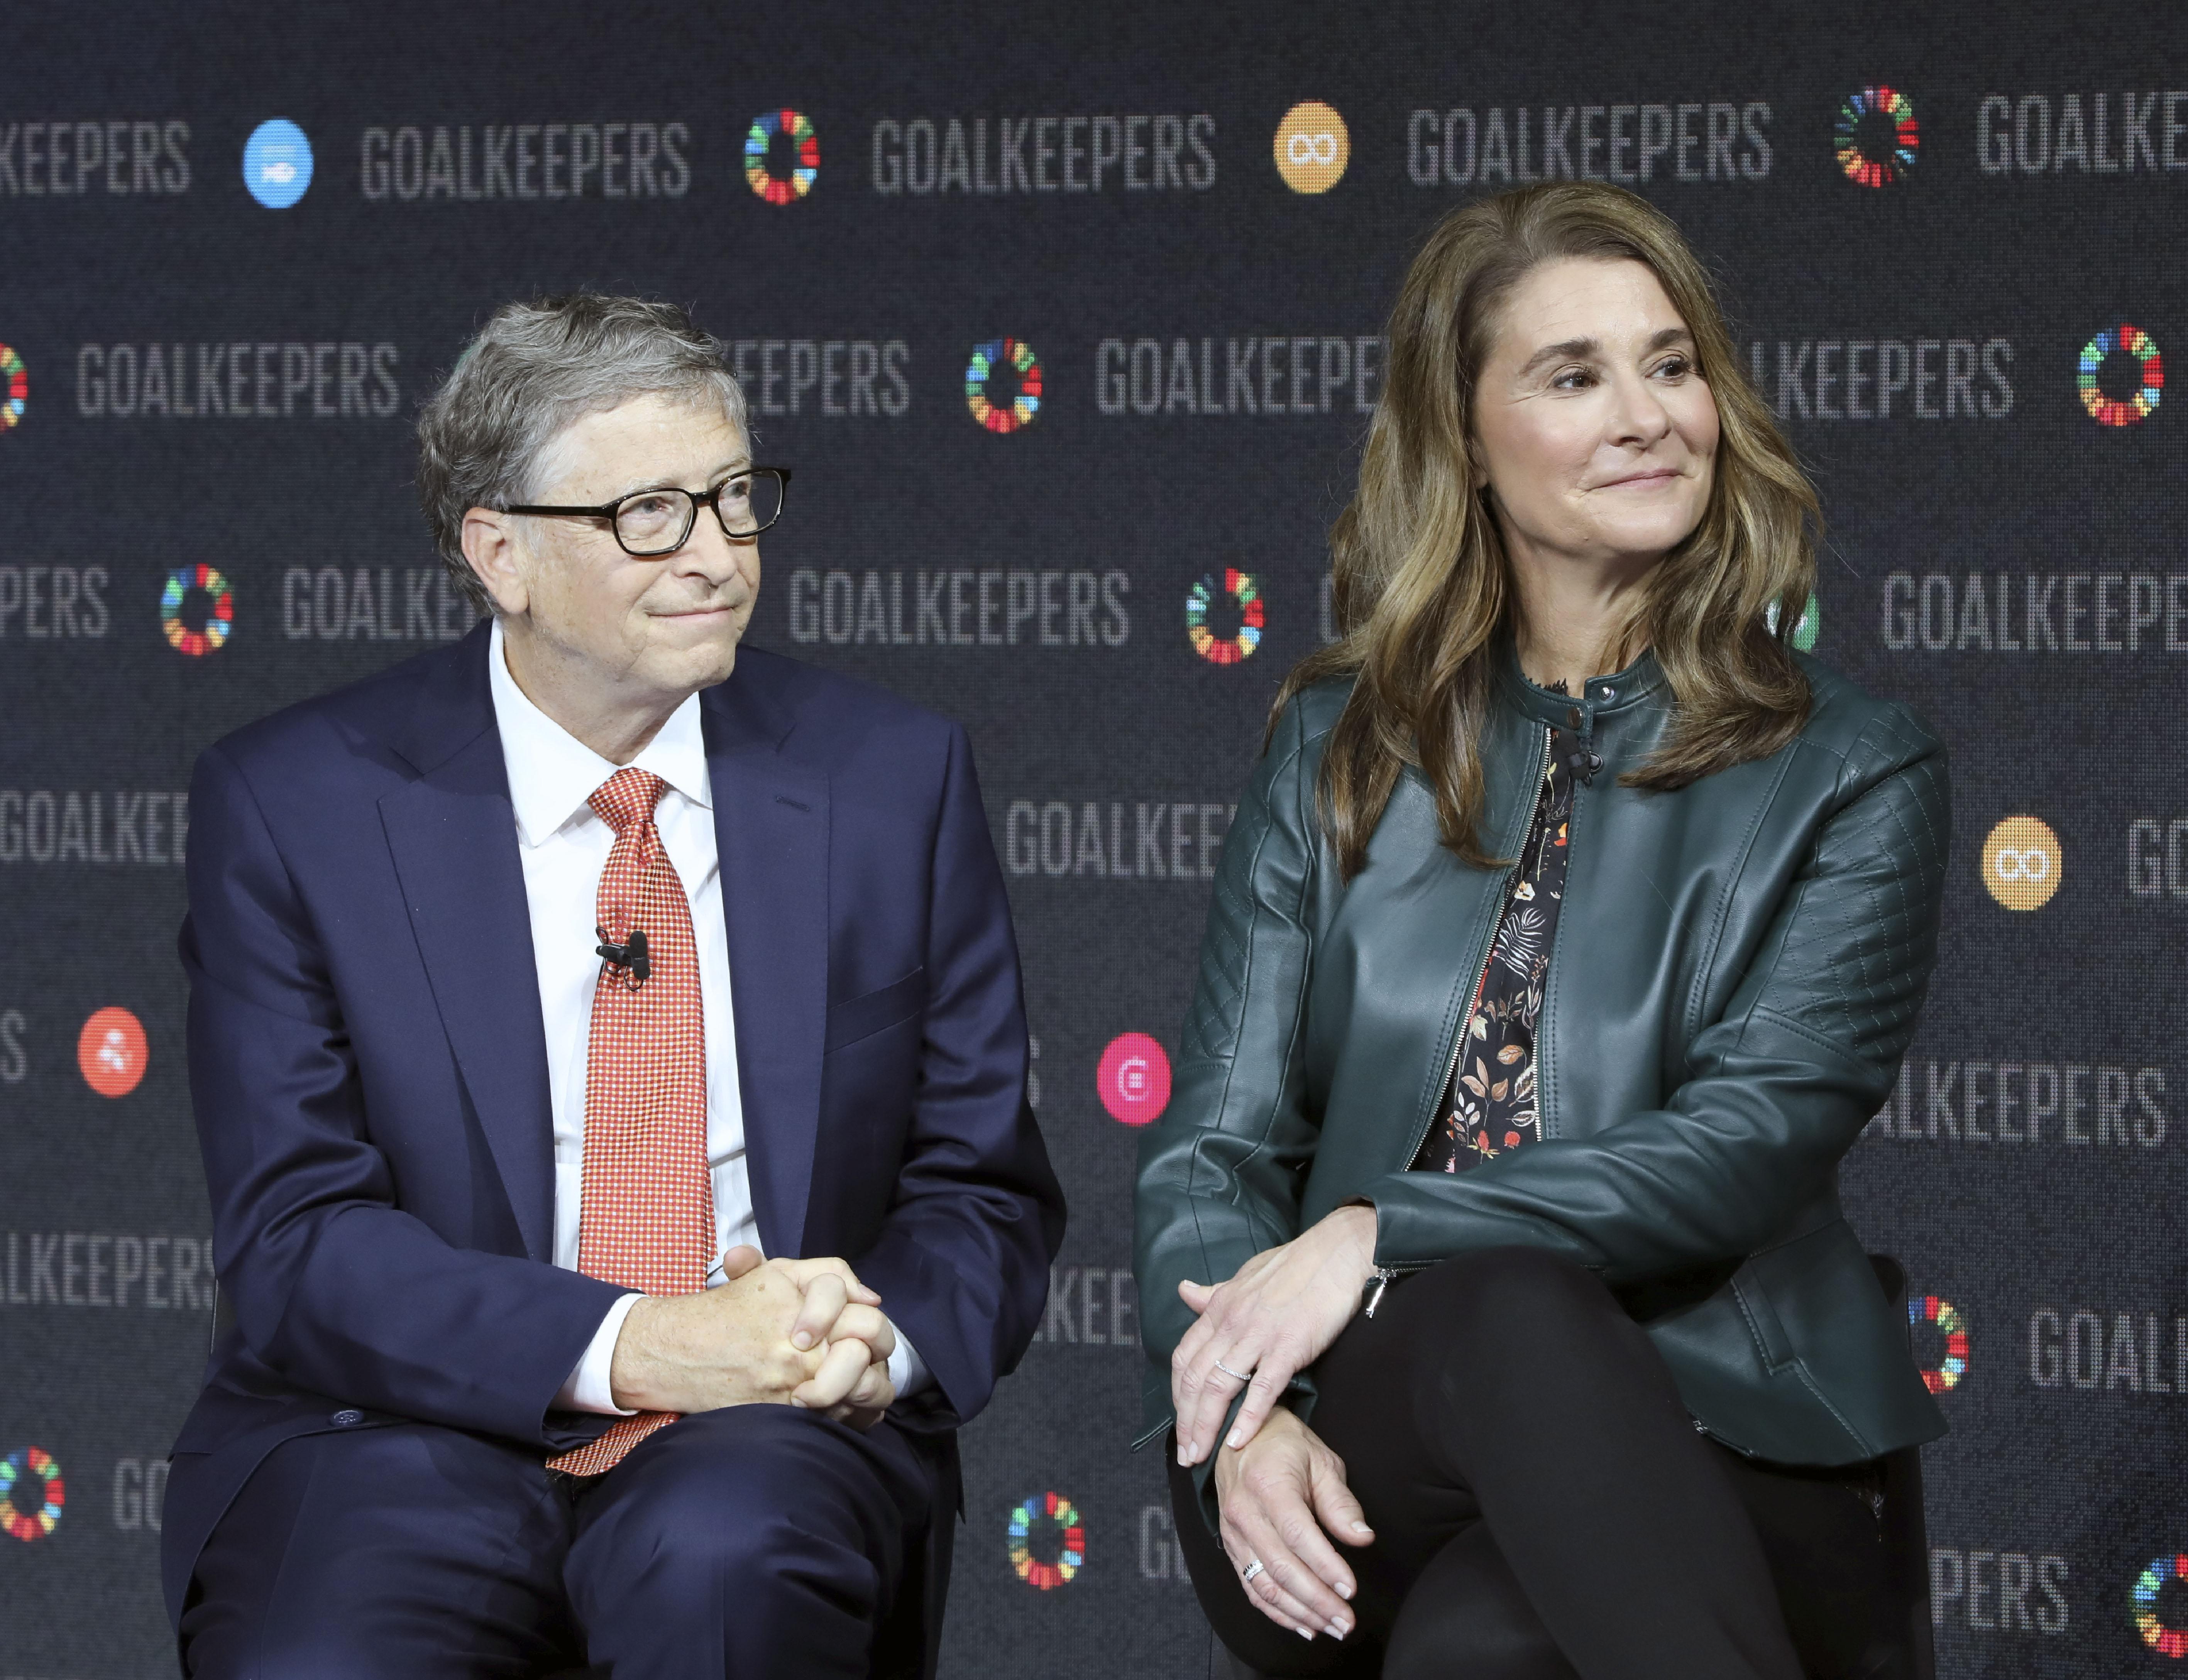 Bill gates dated hot girls Bill And Melinda Gates Divorce There S A Simple Reason No One Saw This Coming